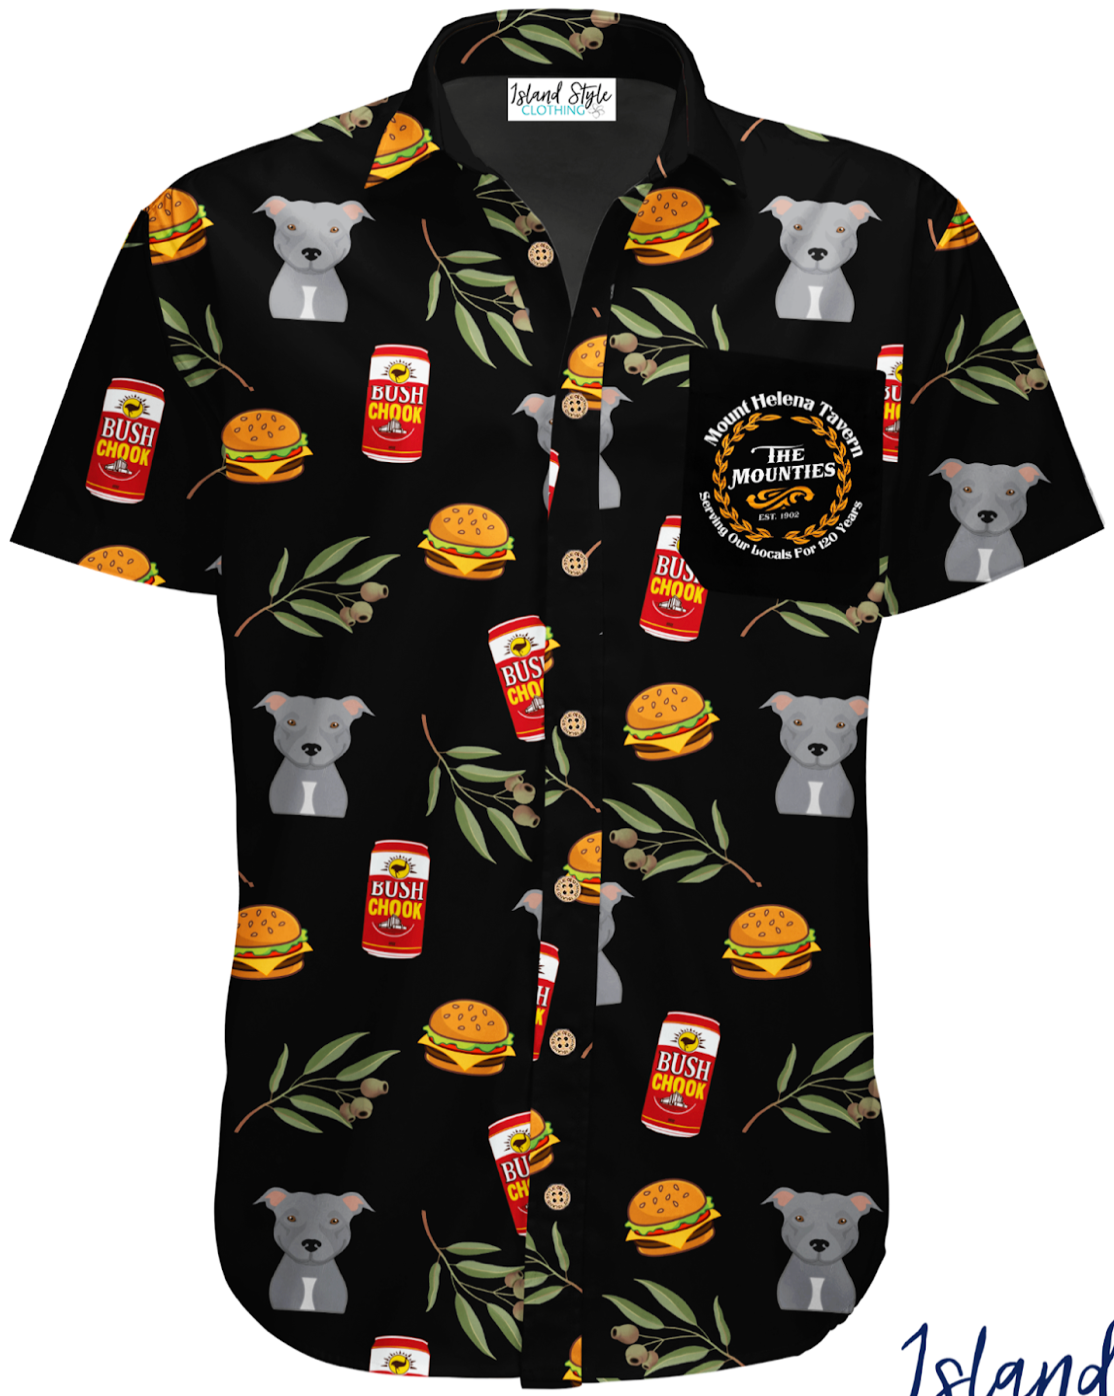 Mount Helena Tavern wanted some funky new hospitality uniforms in a modern Aussie look with Bush Chook beer cans, a dog, burgers and gum leaves.